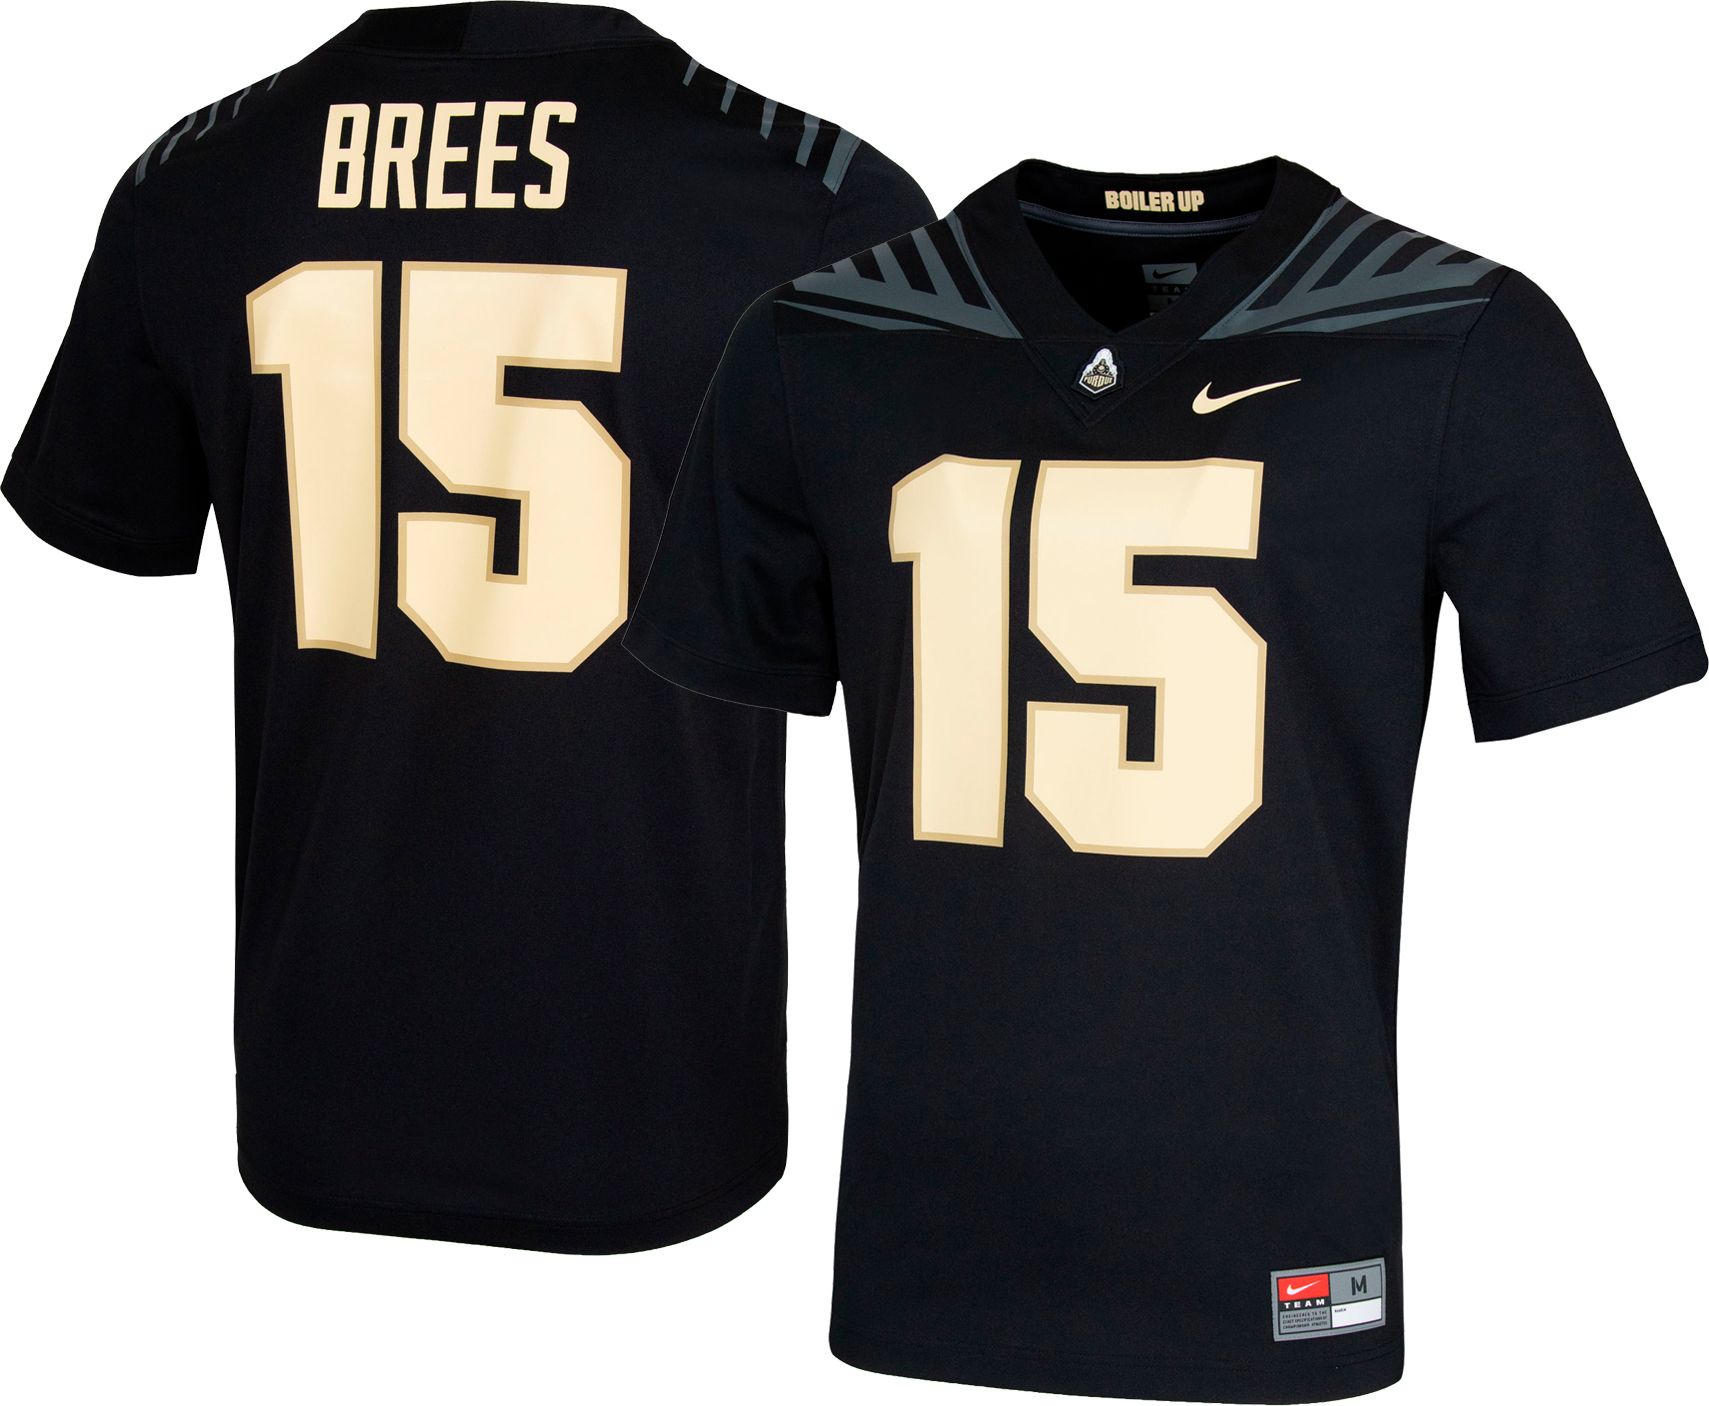 purdue youth football jersey